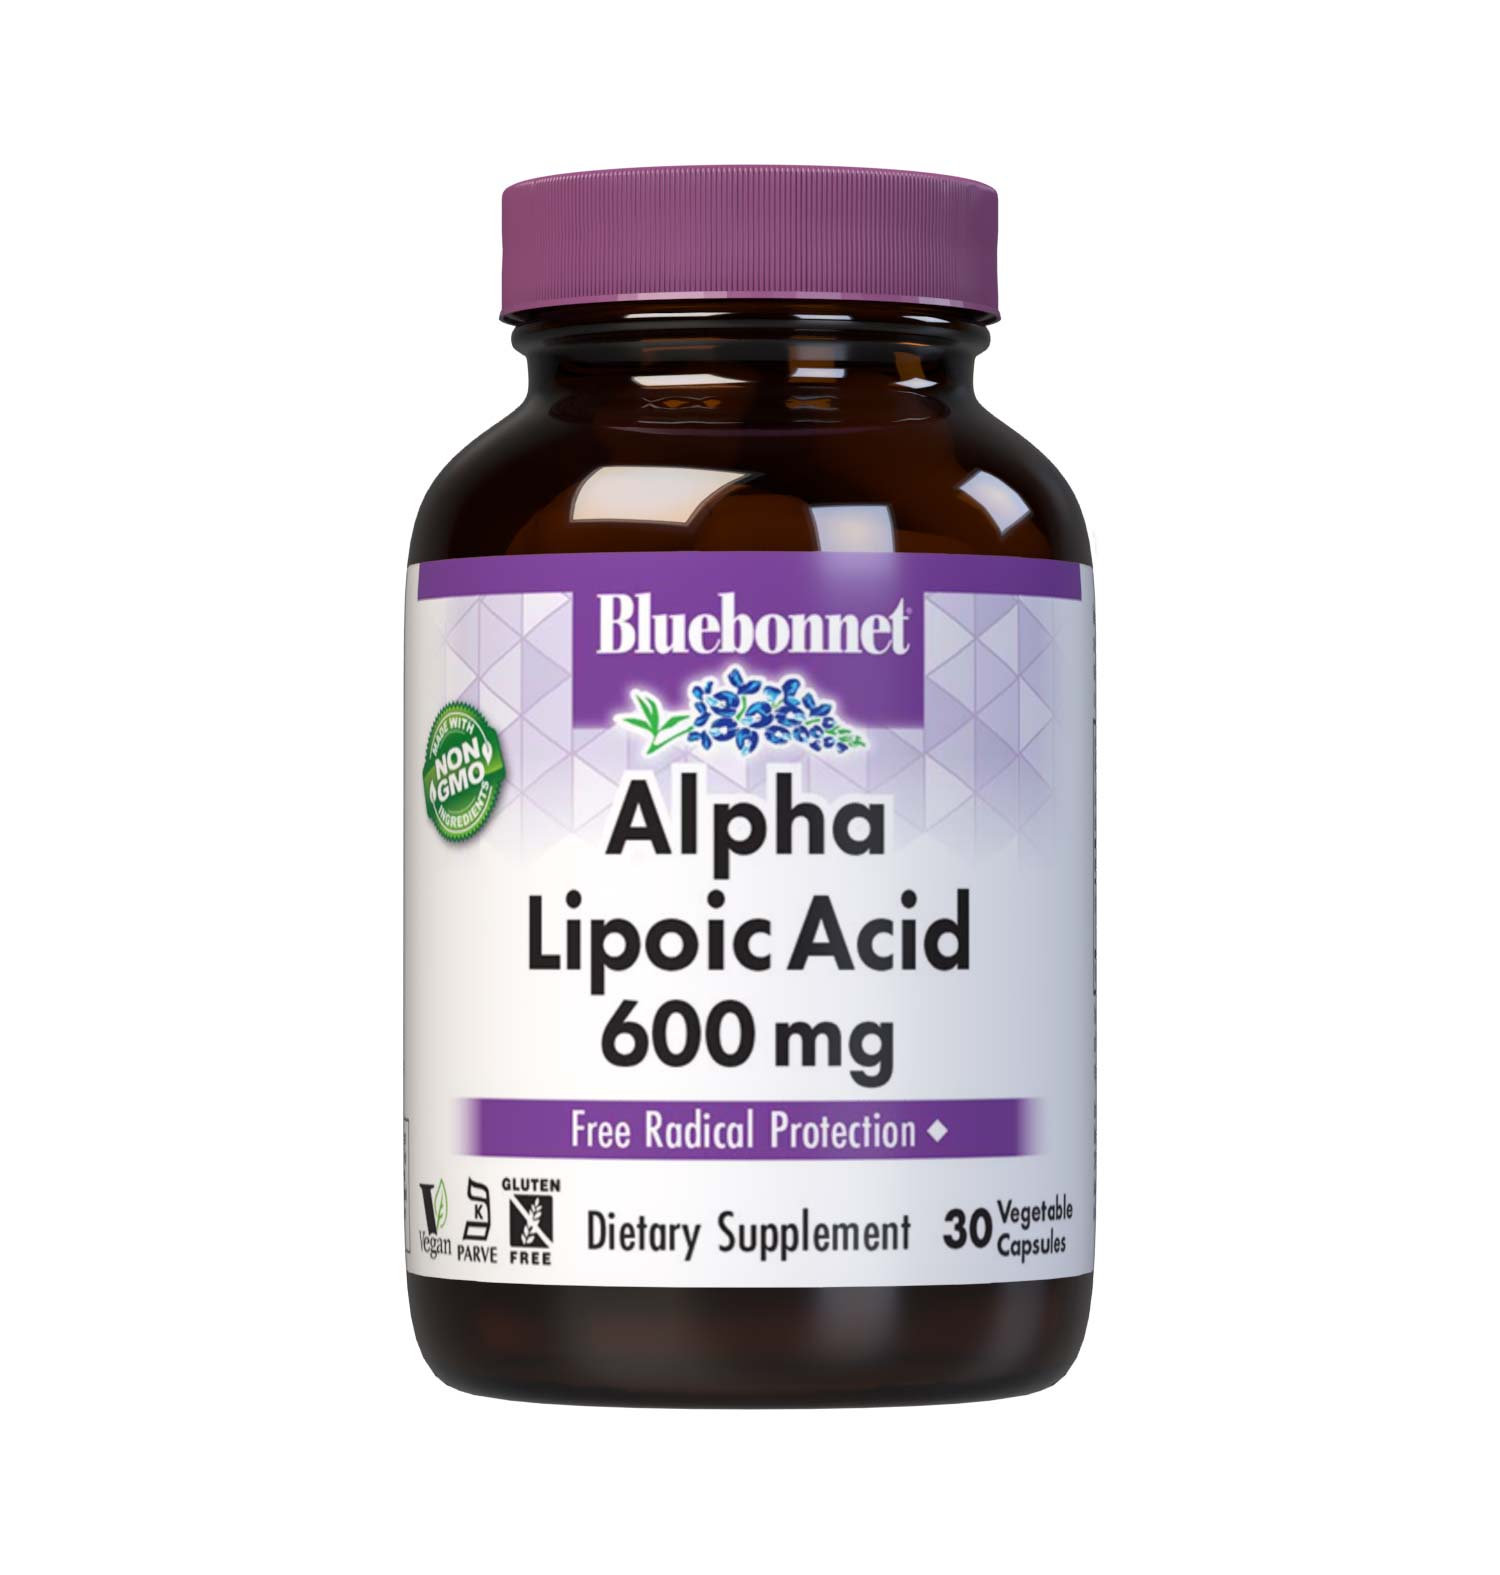 Bluebonnet’s Alpha Lipoic Acid 600 mg 30 Vegetable Capsules are formulated with alpha lipoic acid in its crystalline form. Alpha lipoic acid is a unique antioxidant that is both fat-soluble and water-soluble, and is known for its free radical scavenger activity. #size_30 count